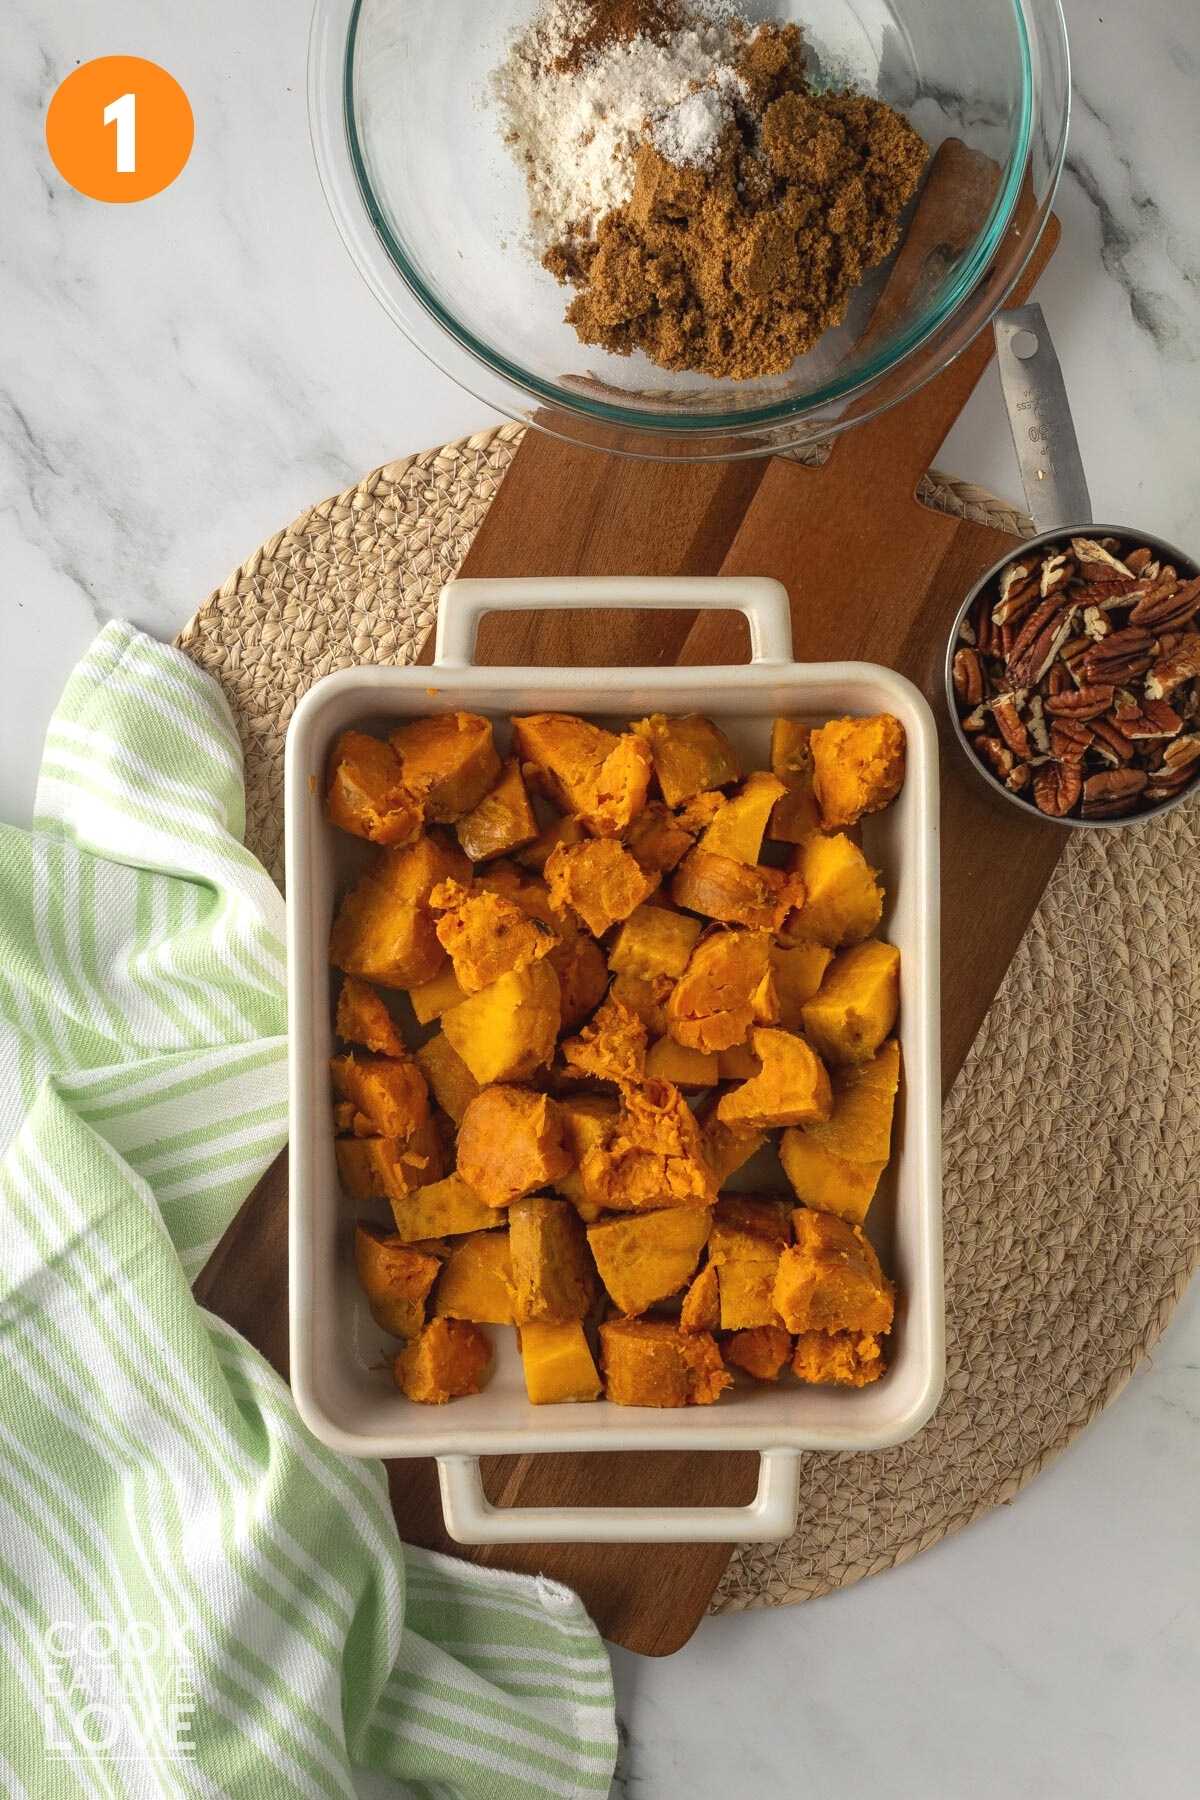 Overhead shot of chopped sweet potatoes in a white casserole dish with other ingredients surrounding it.